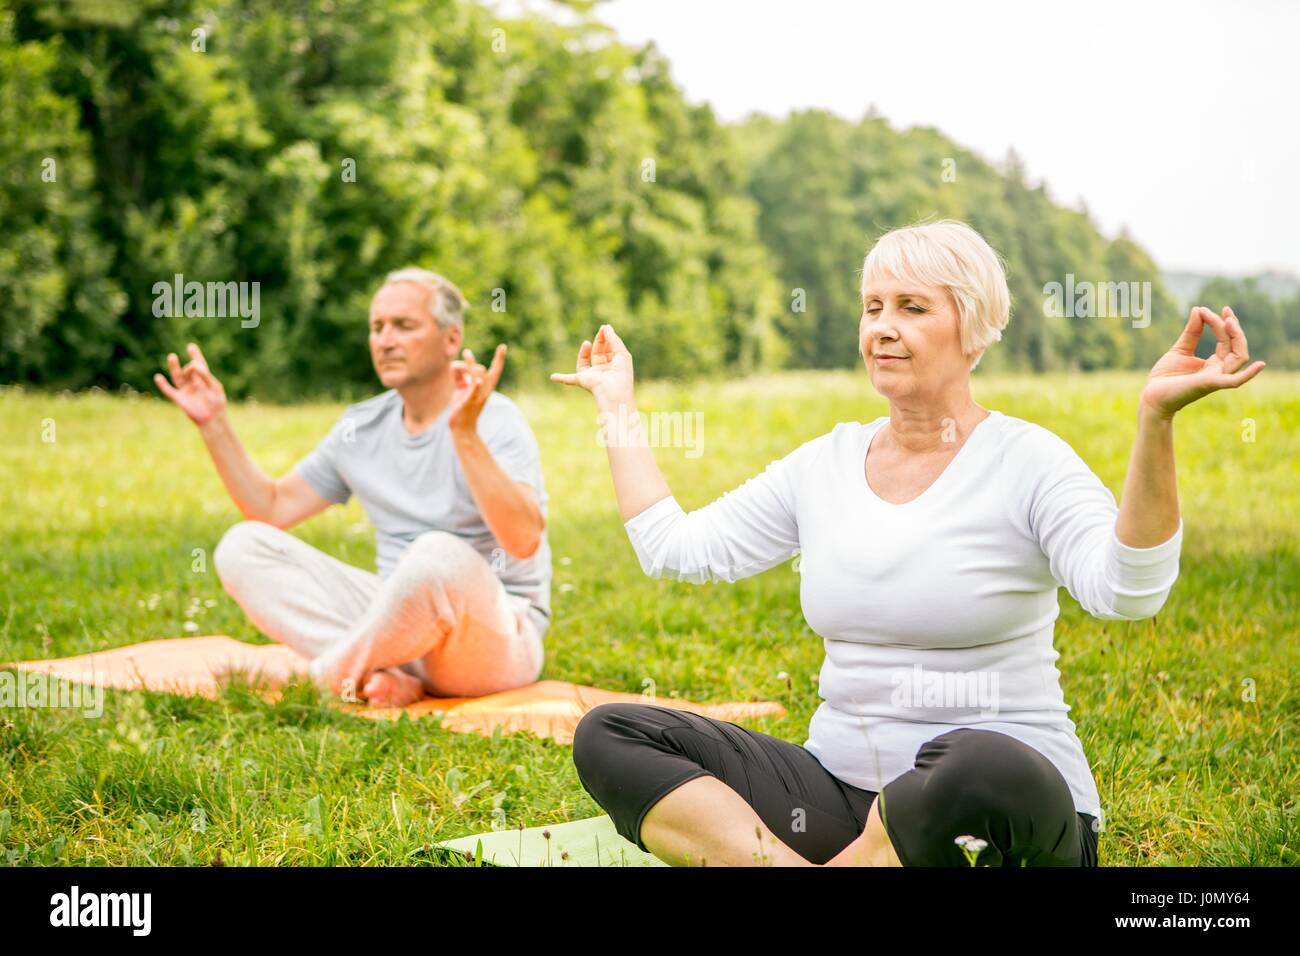 Mature man and senior woman doing yoga in field. Stock Photo